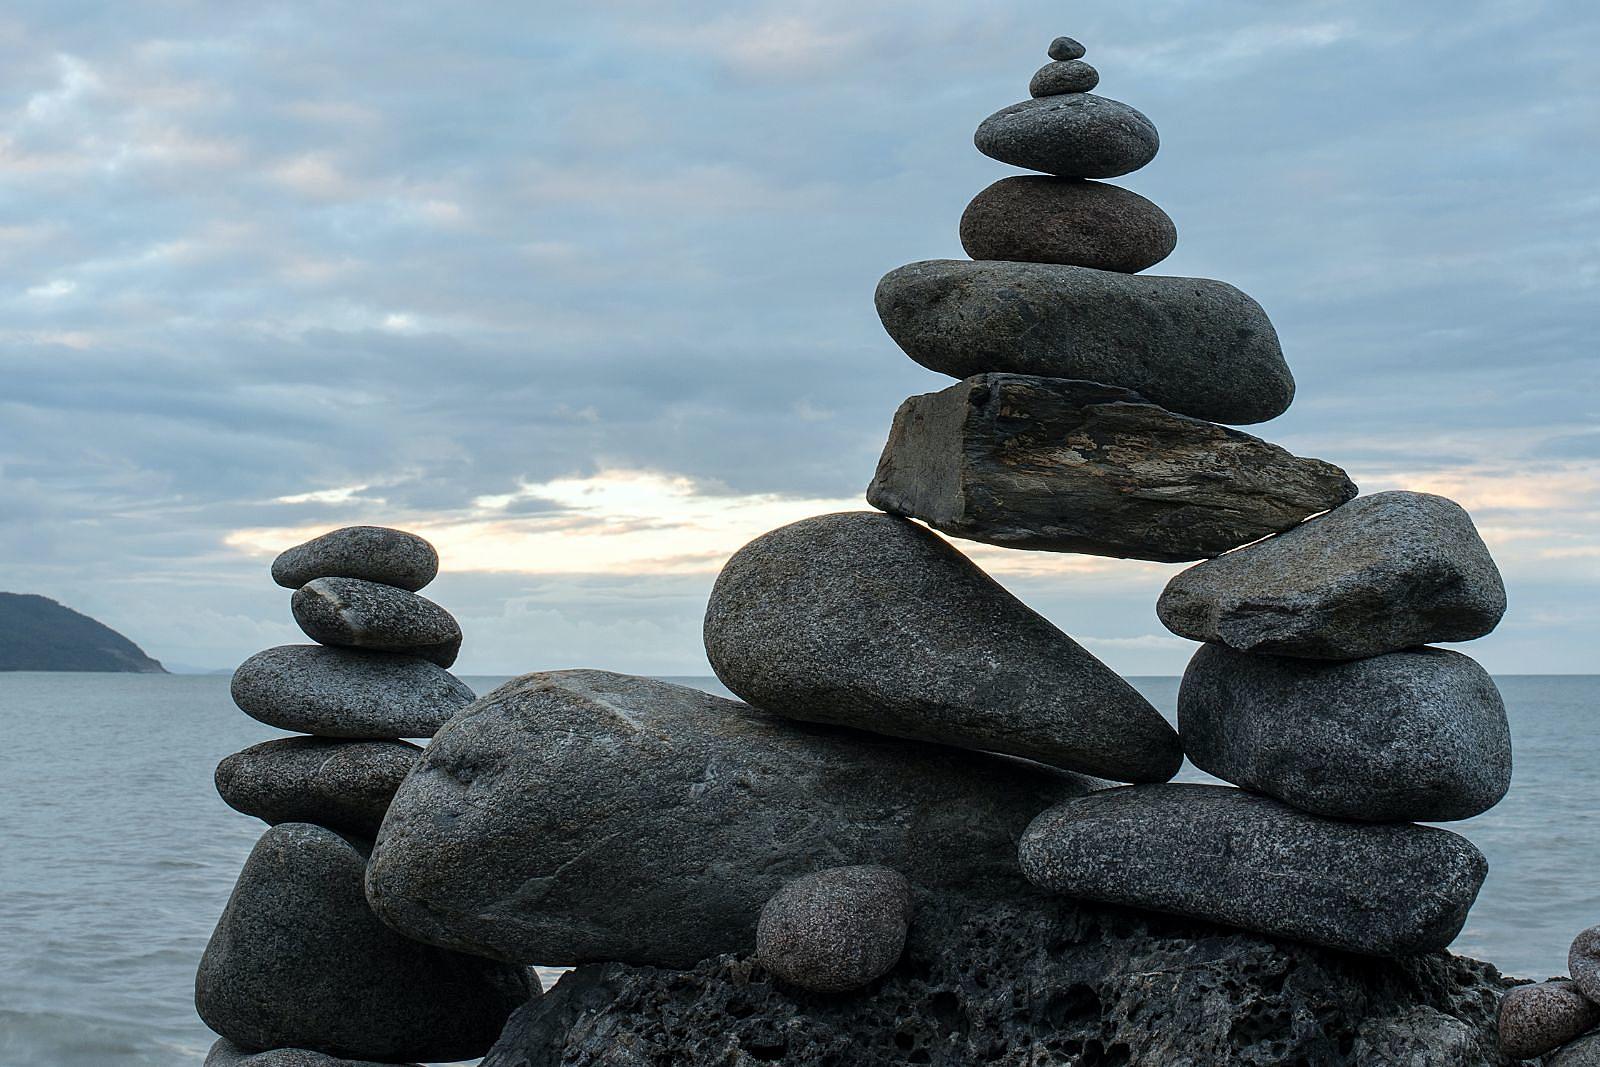 Maine author explains why people are compelled to stack rocks